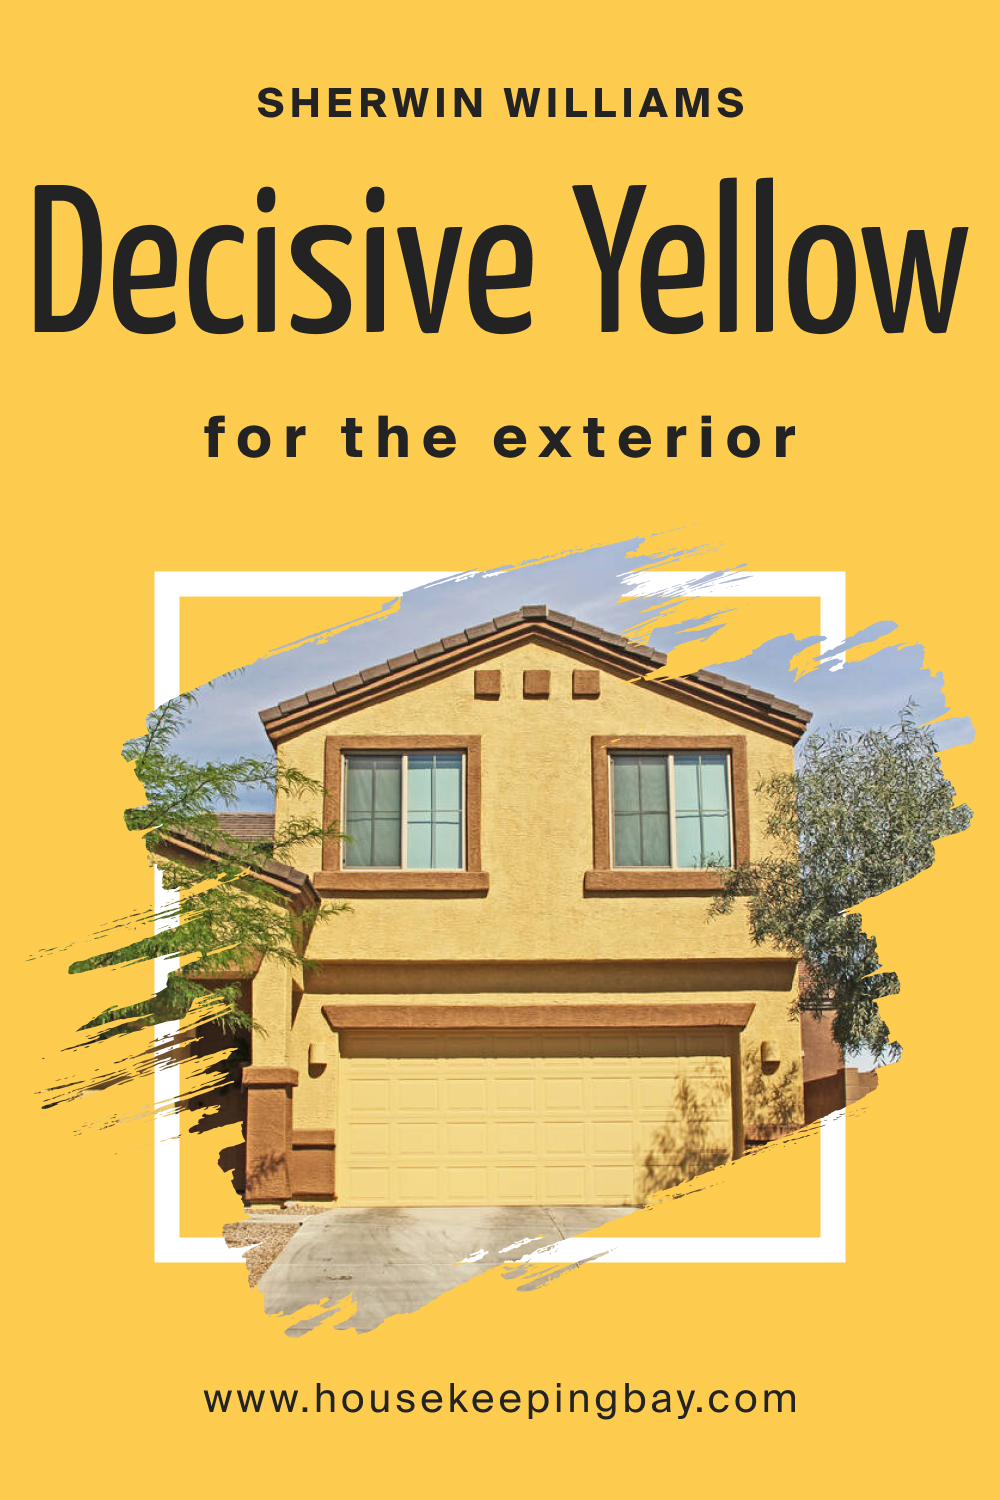 Sherwin Williams. Decisive Yellow SW 6902 For the exterior